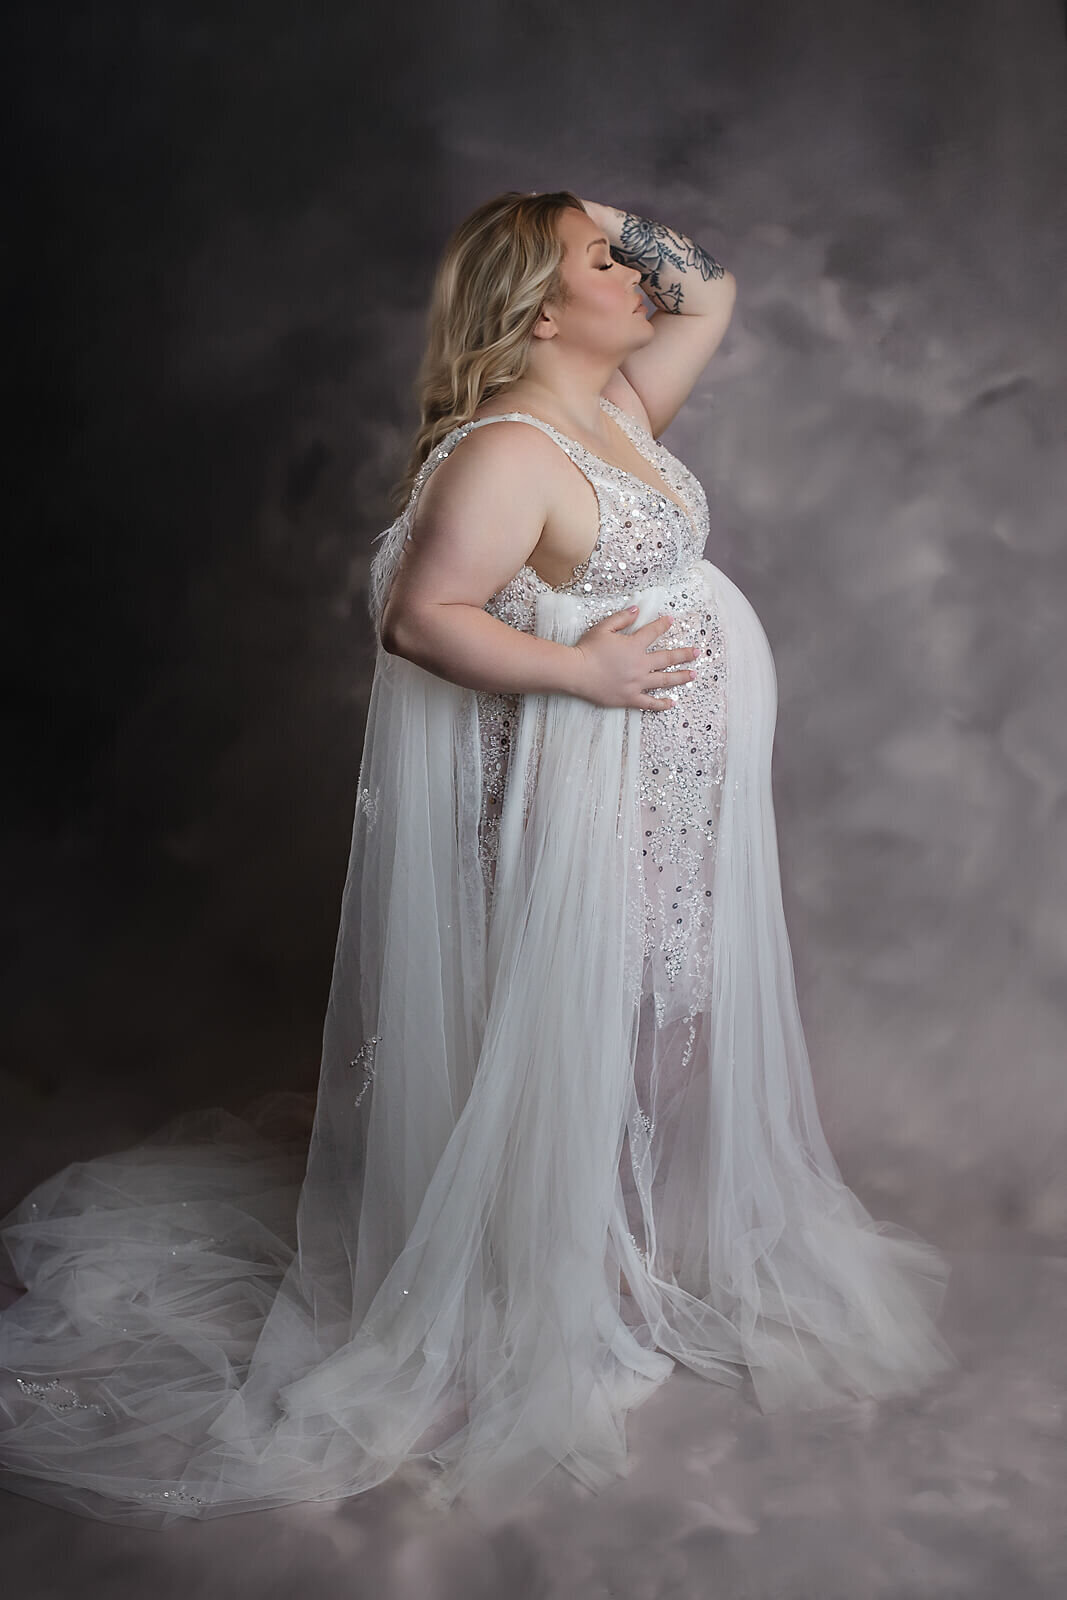 new orleans maternity photographer47